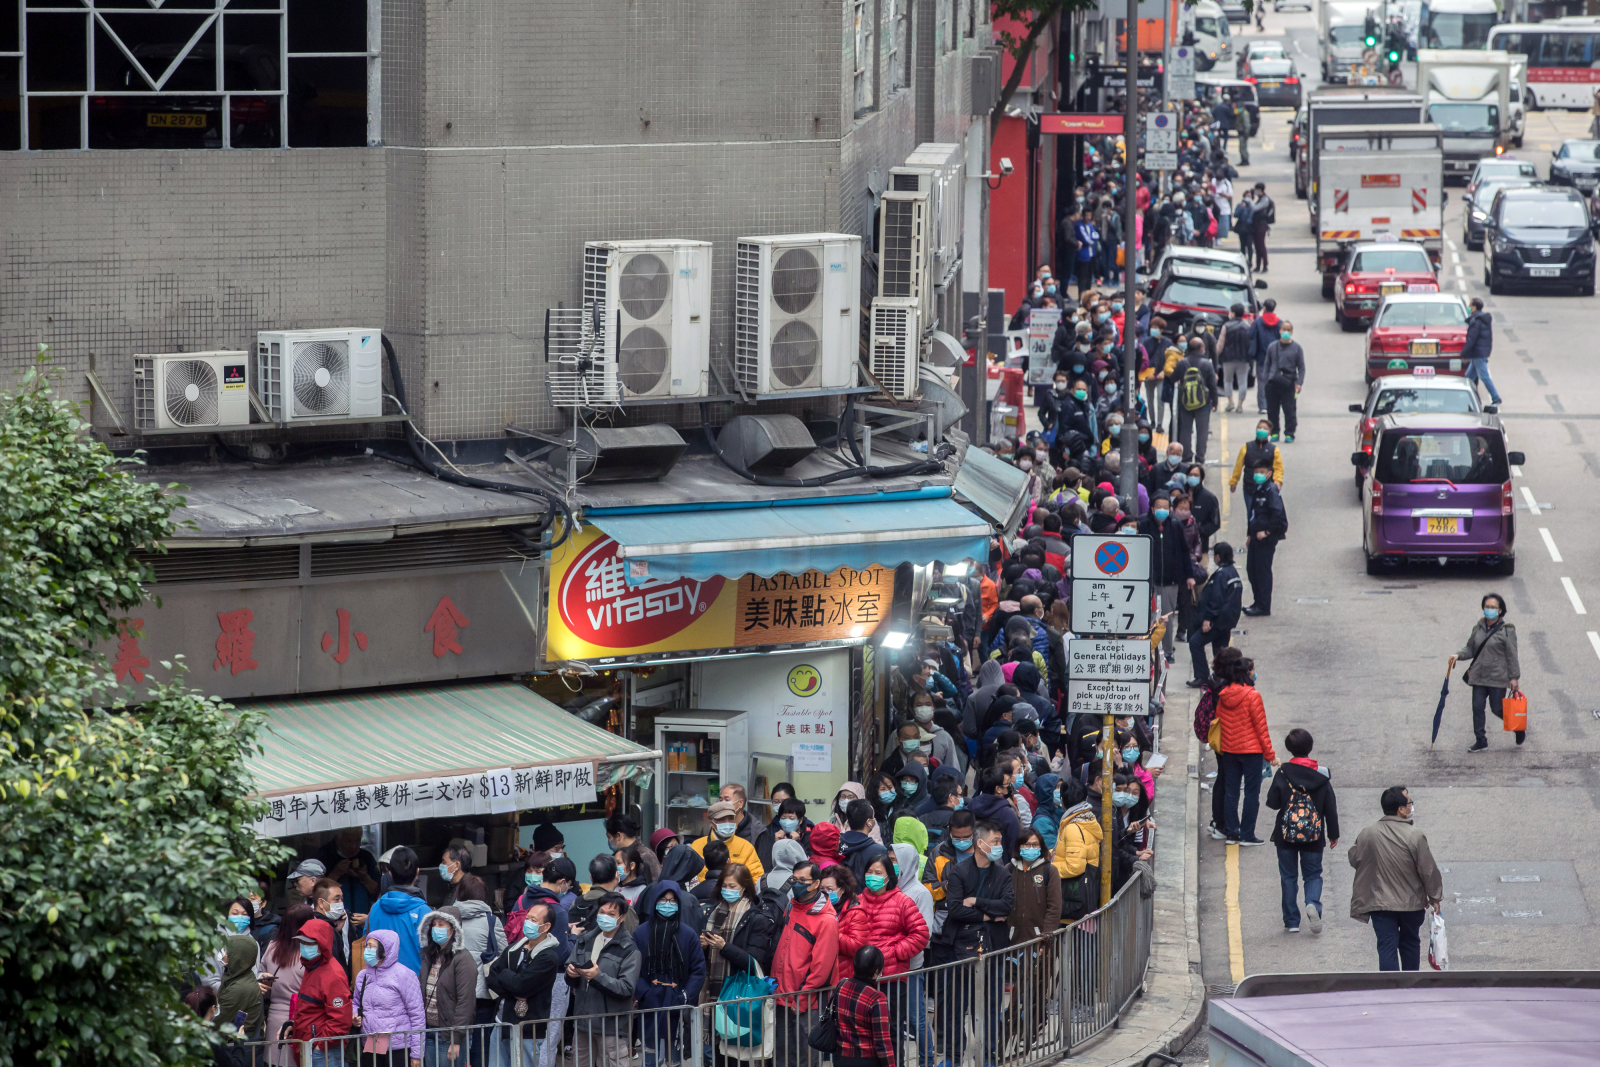 People line up to purchase protective masks in Hong Kong’s Kowloon Bay district on February 5. (Picture: Paul Yeung/Bloomberg)